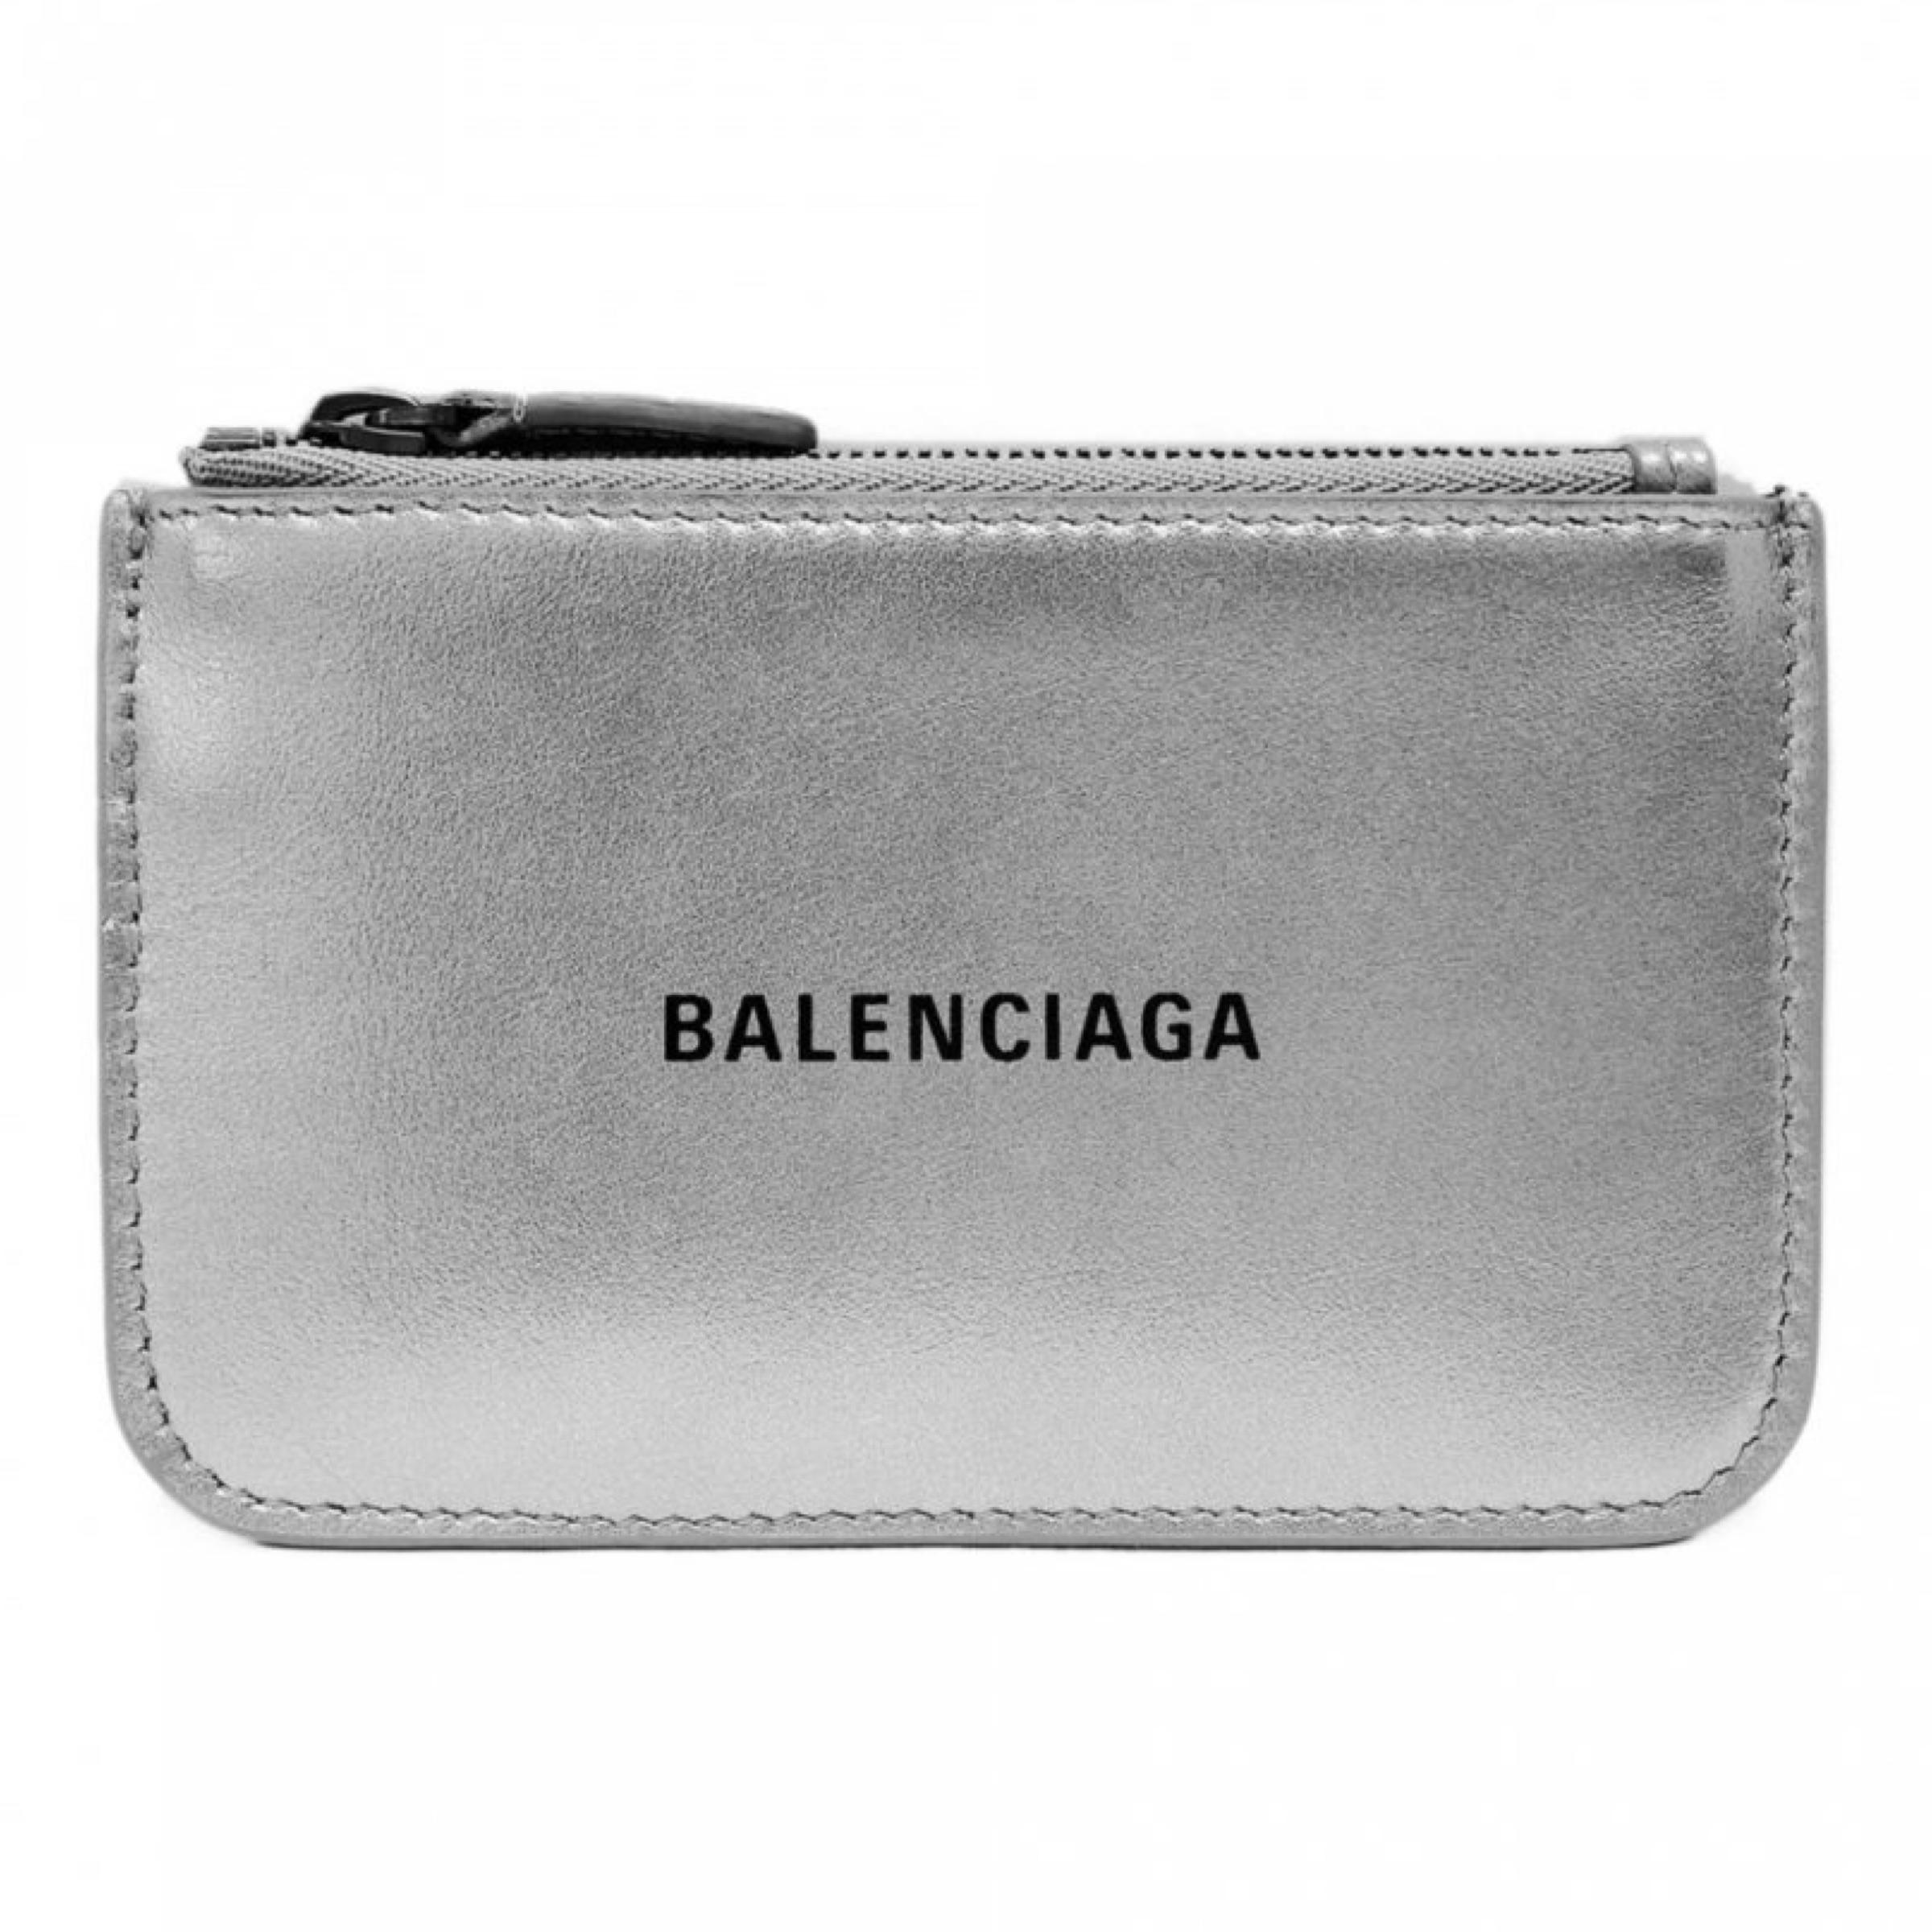 New Balenciaga Silver Printed Logo Leather Key Chain Pouch Bag

Authenticity Guaranteed

DETAILS
Brand: Balenciaga
Condition: Brand new
Gender: Unisex
Category: Pouch
Color: Silver
Material: Leather
Front logo print
Silver-tone hardware
Top-zip